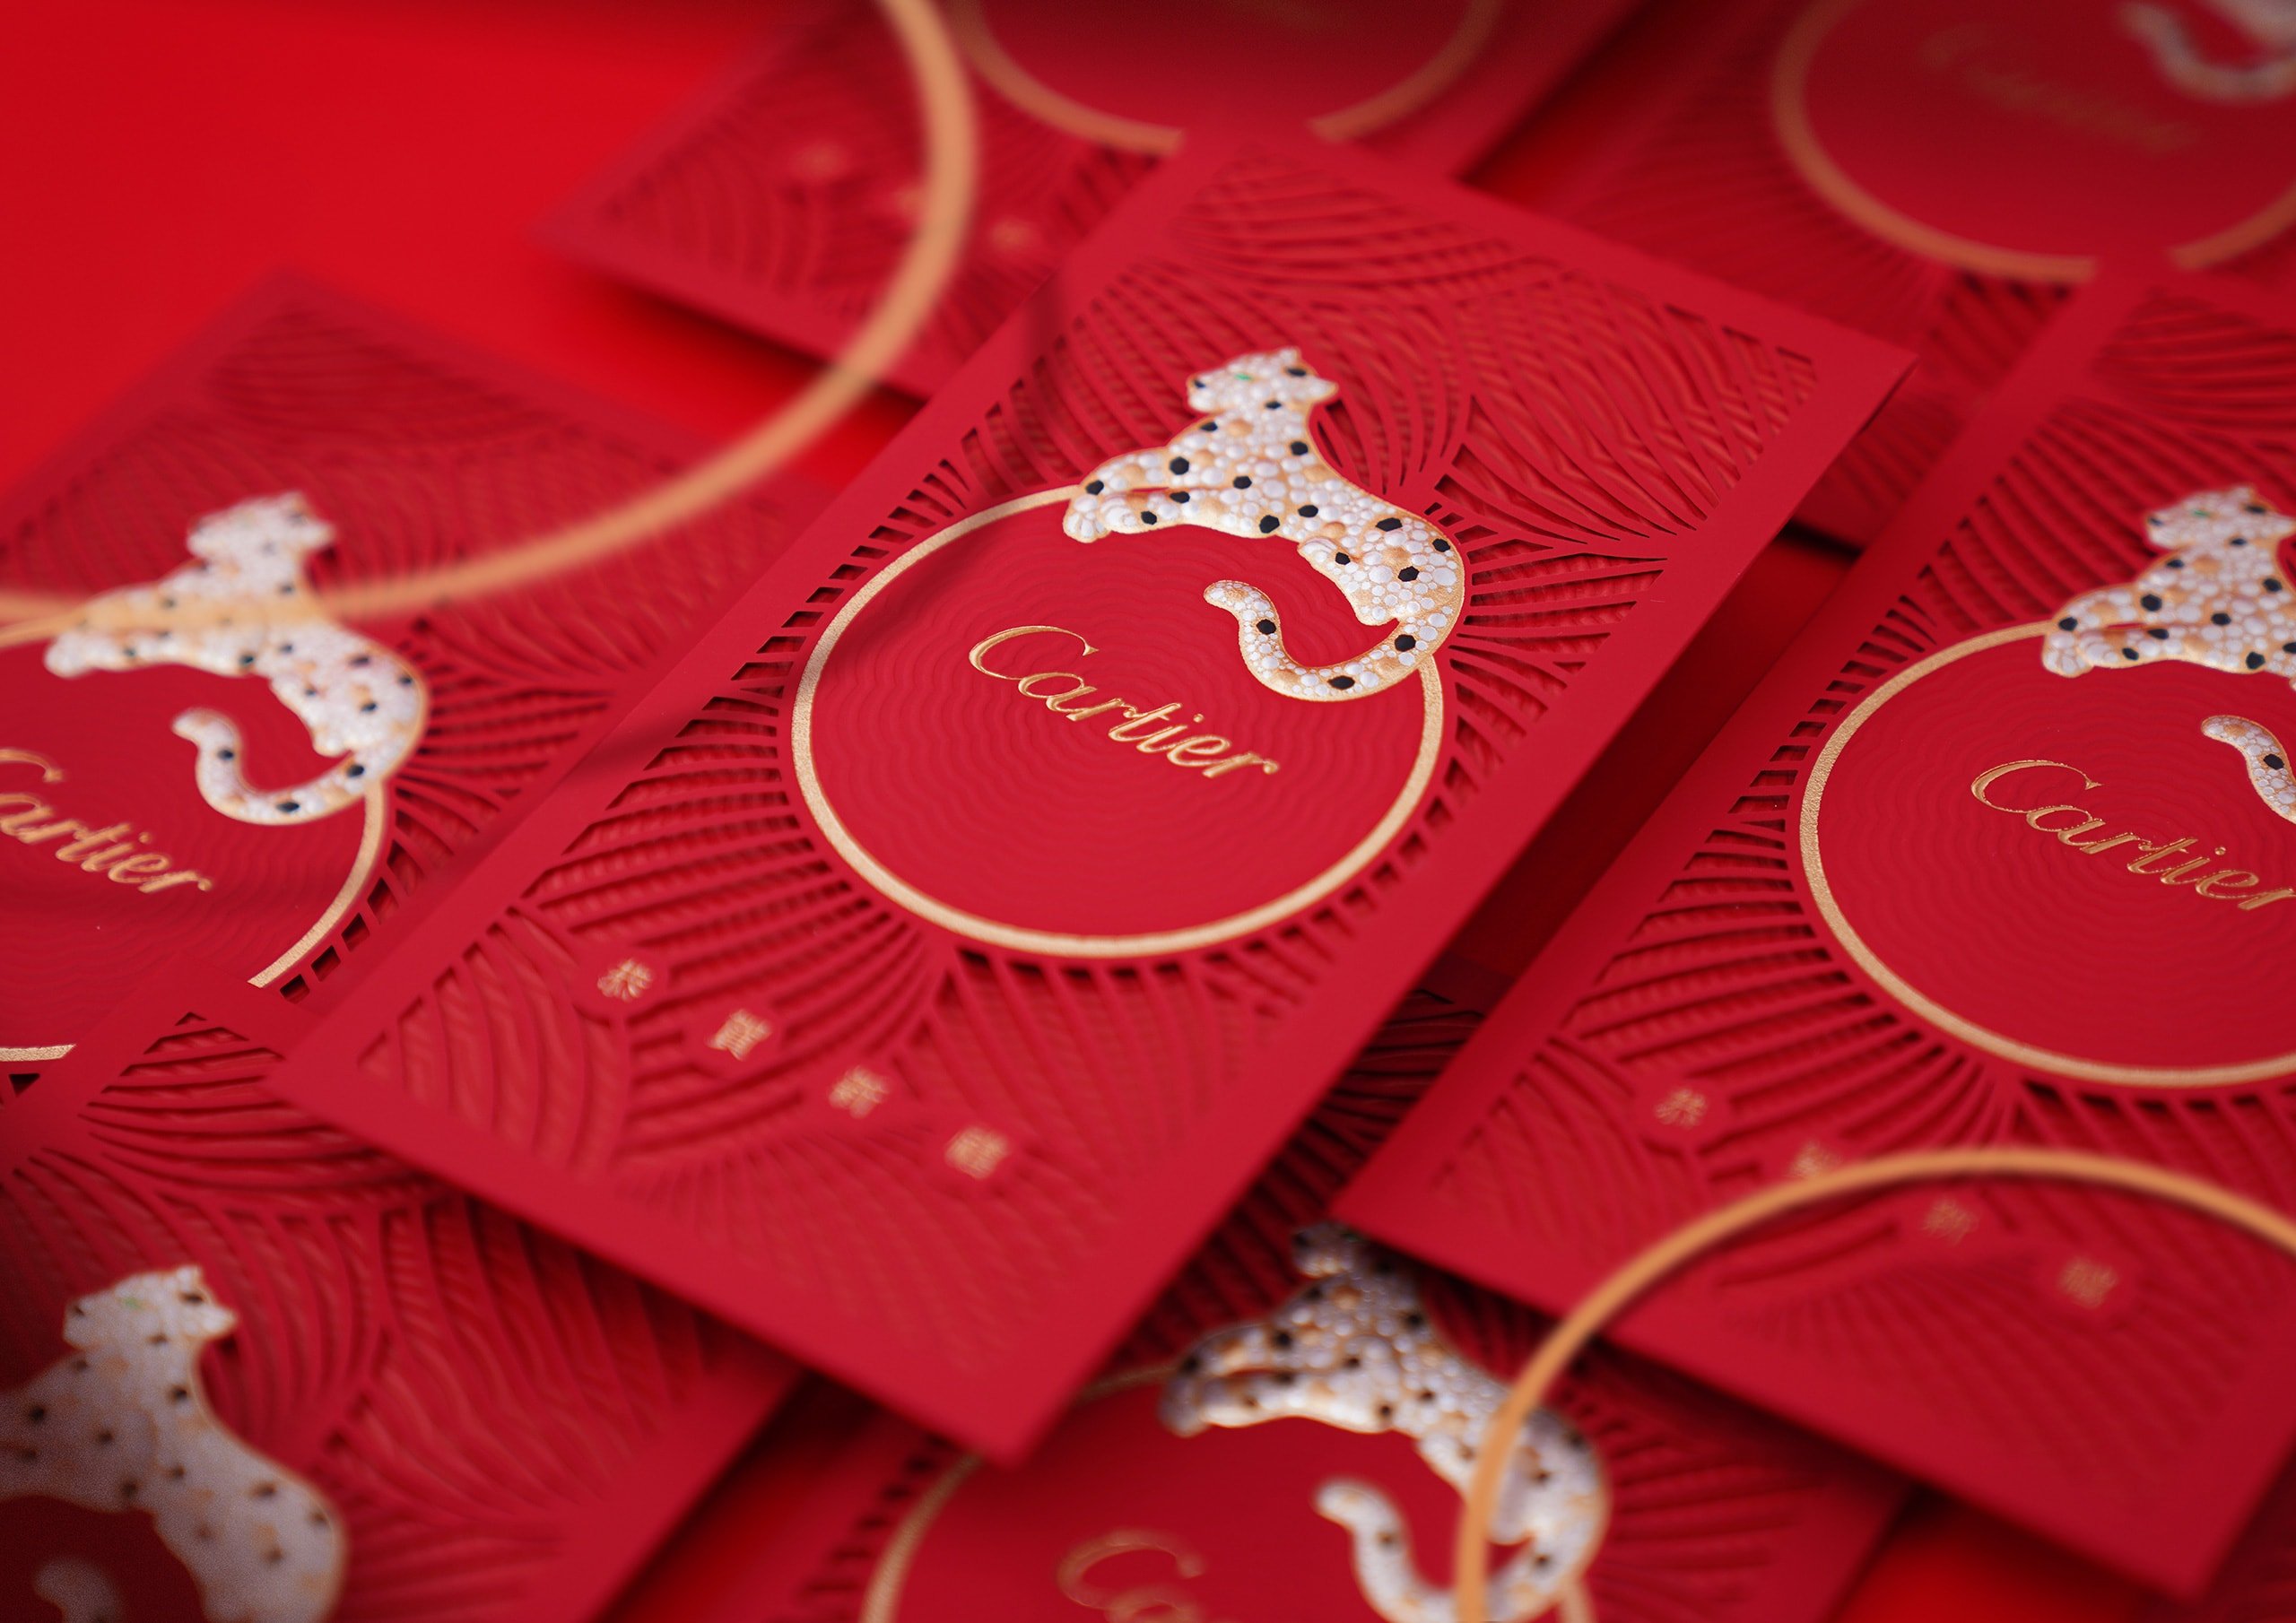 Luxury brands and the red envelope